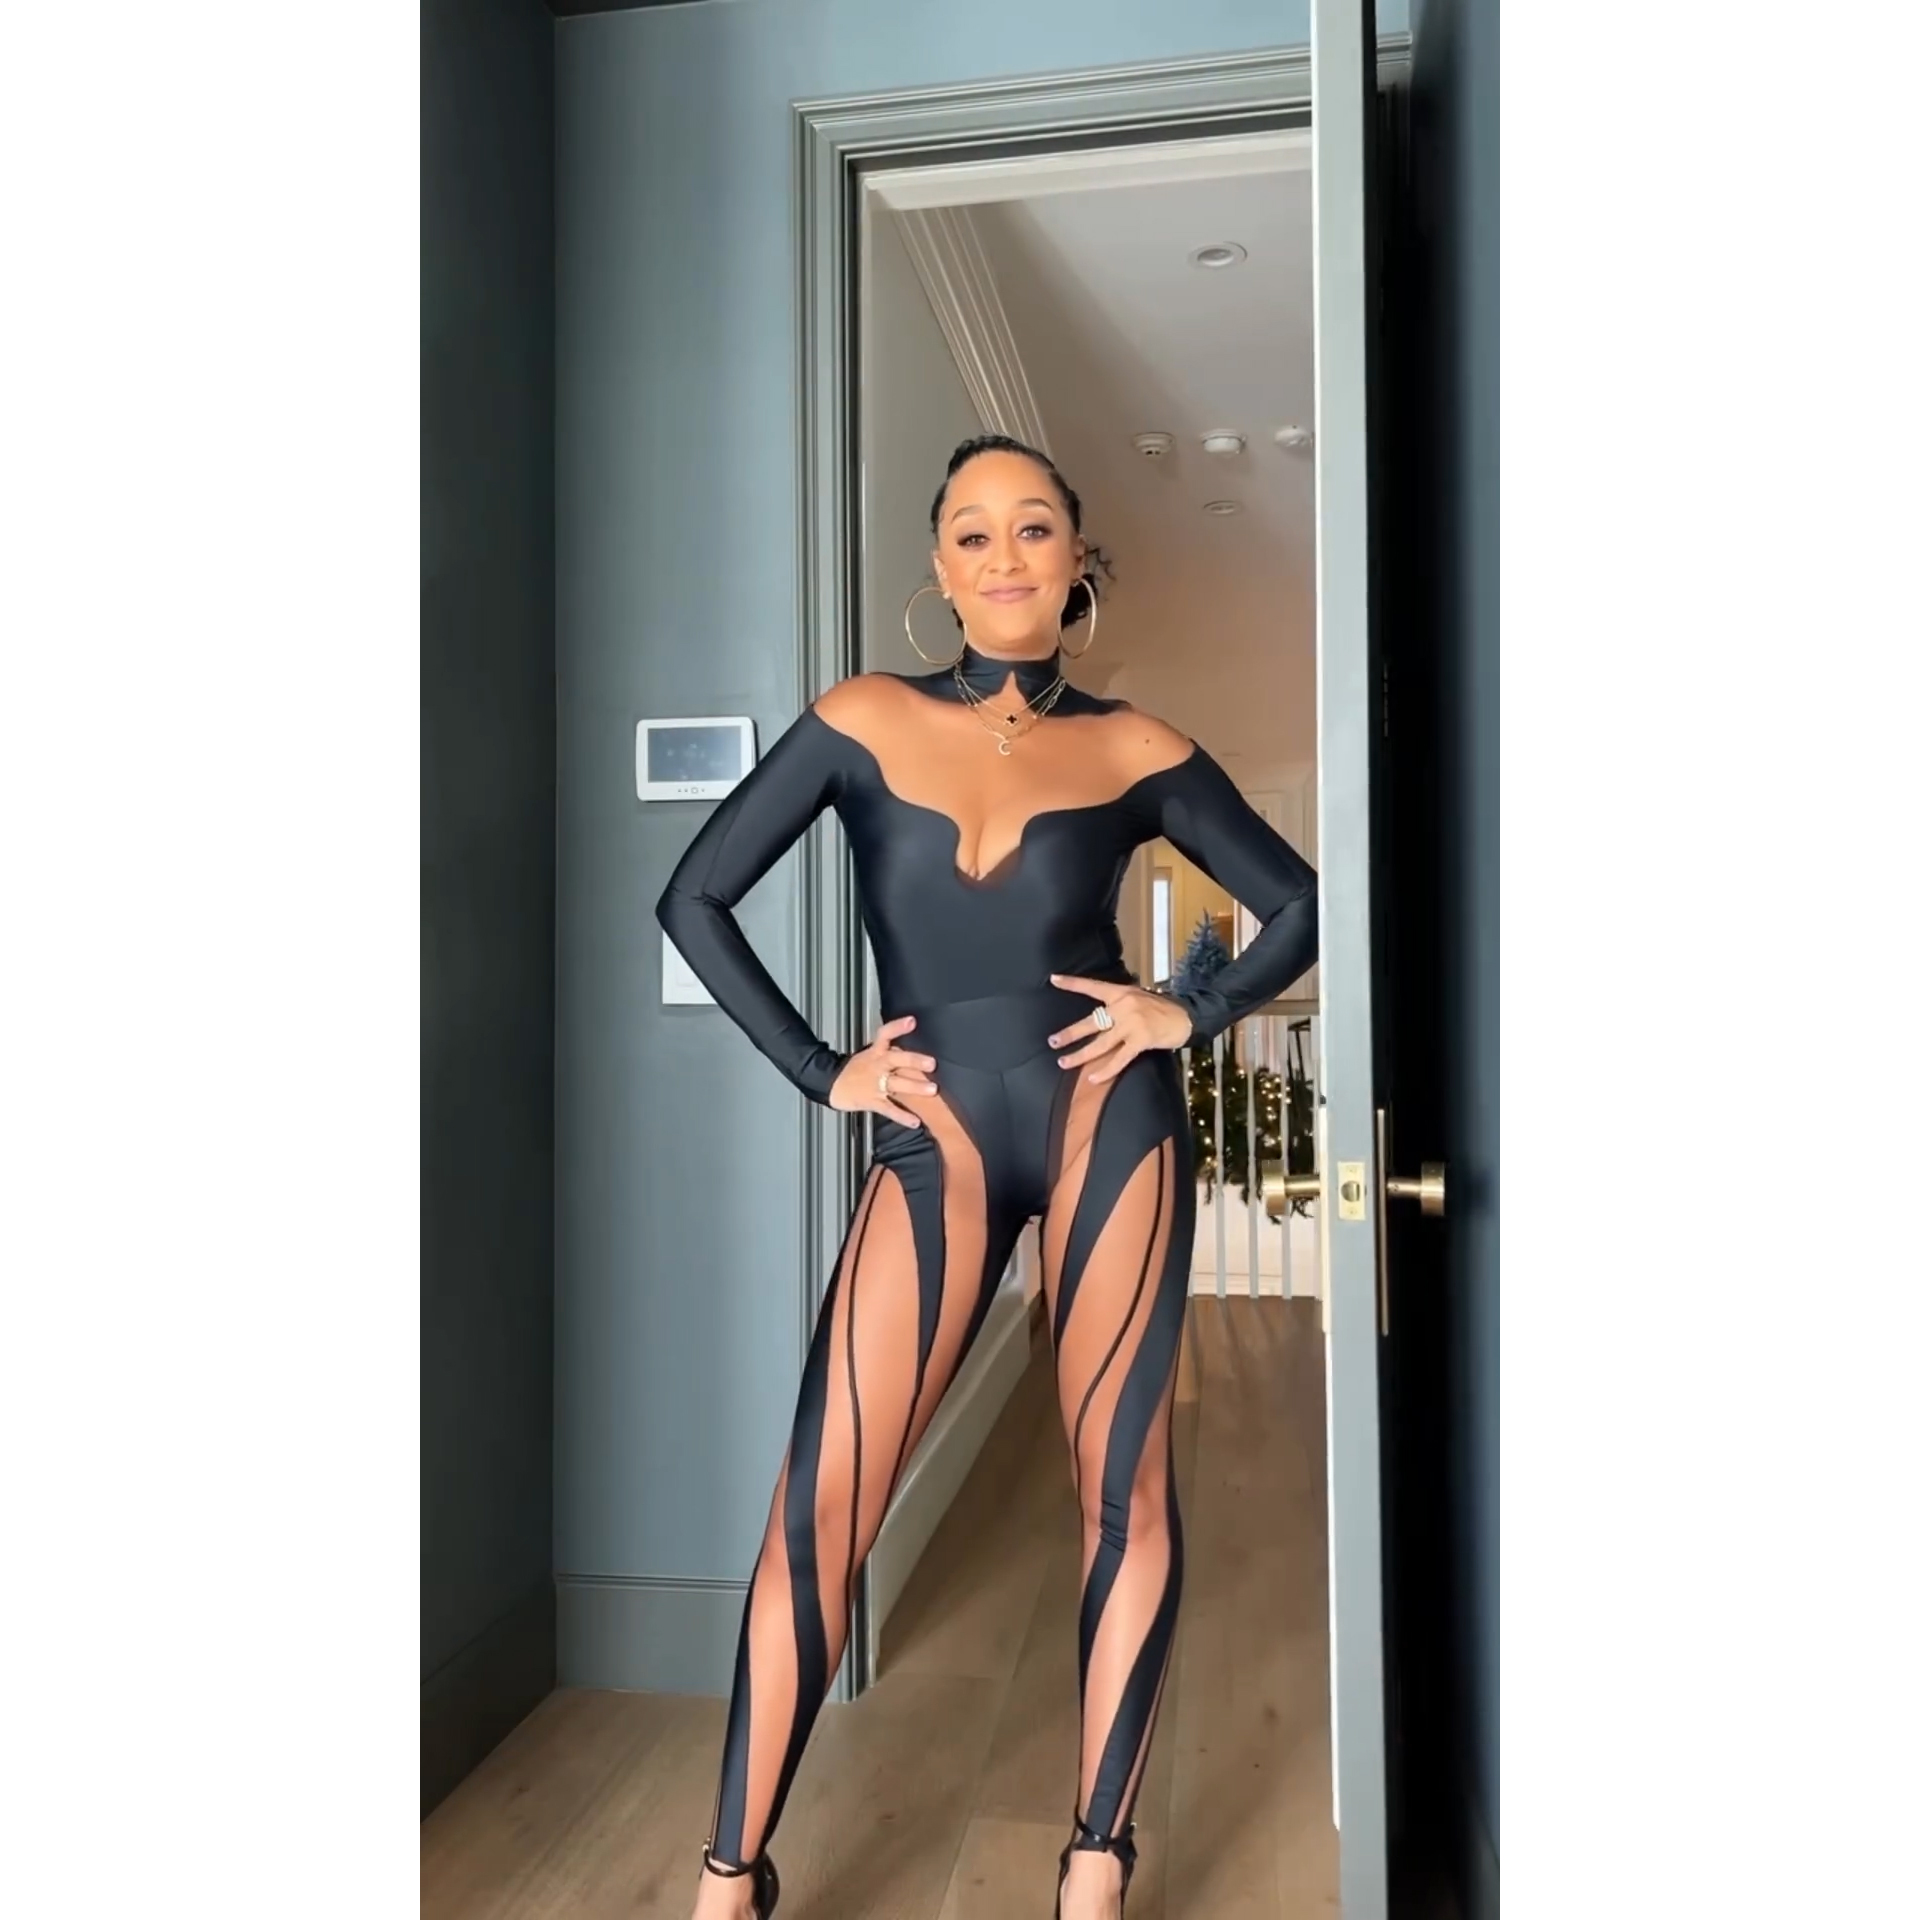 Tia Mowry Shows Off ‘Most Unapologetic Version of Myself’ in Bold Catsuit